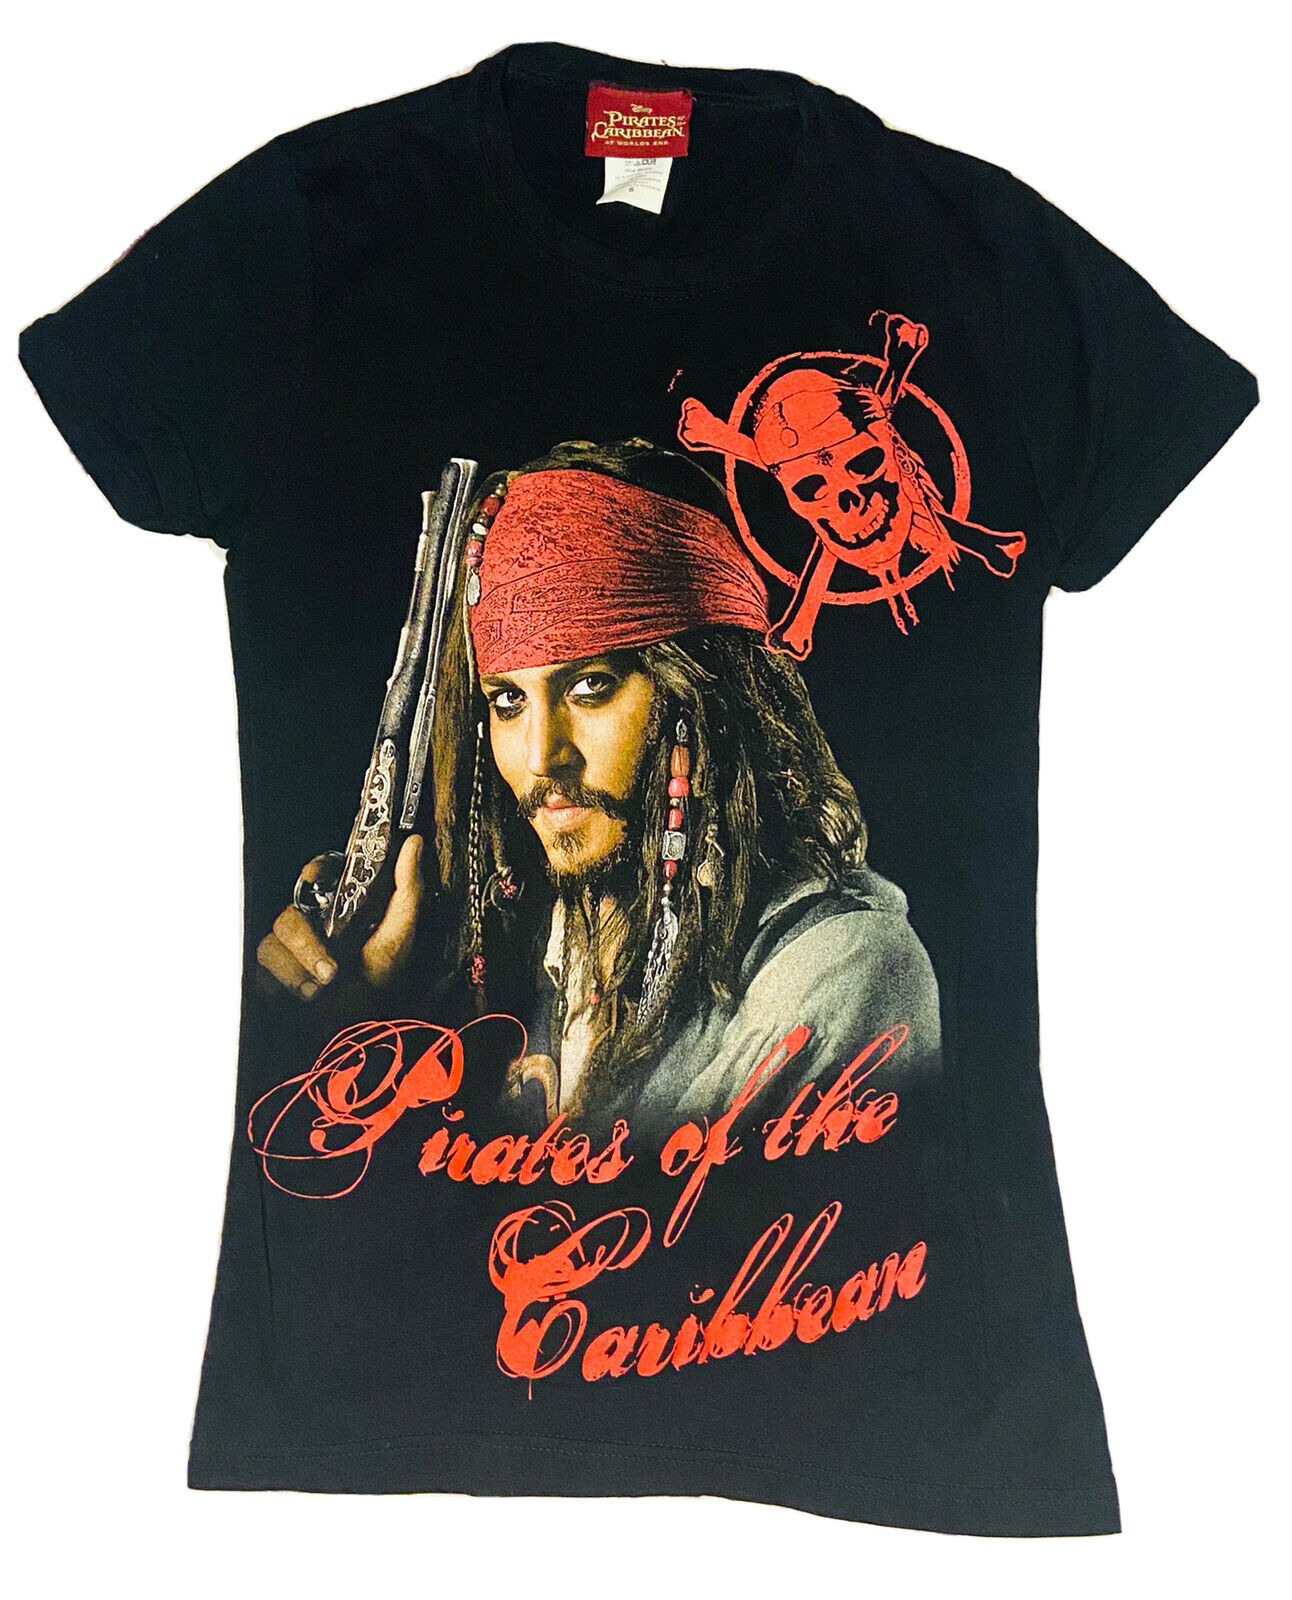 Disney's Pirates of the Caribbean: At World's End 2007 Jack Sparrow Shirt; S